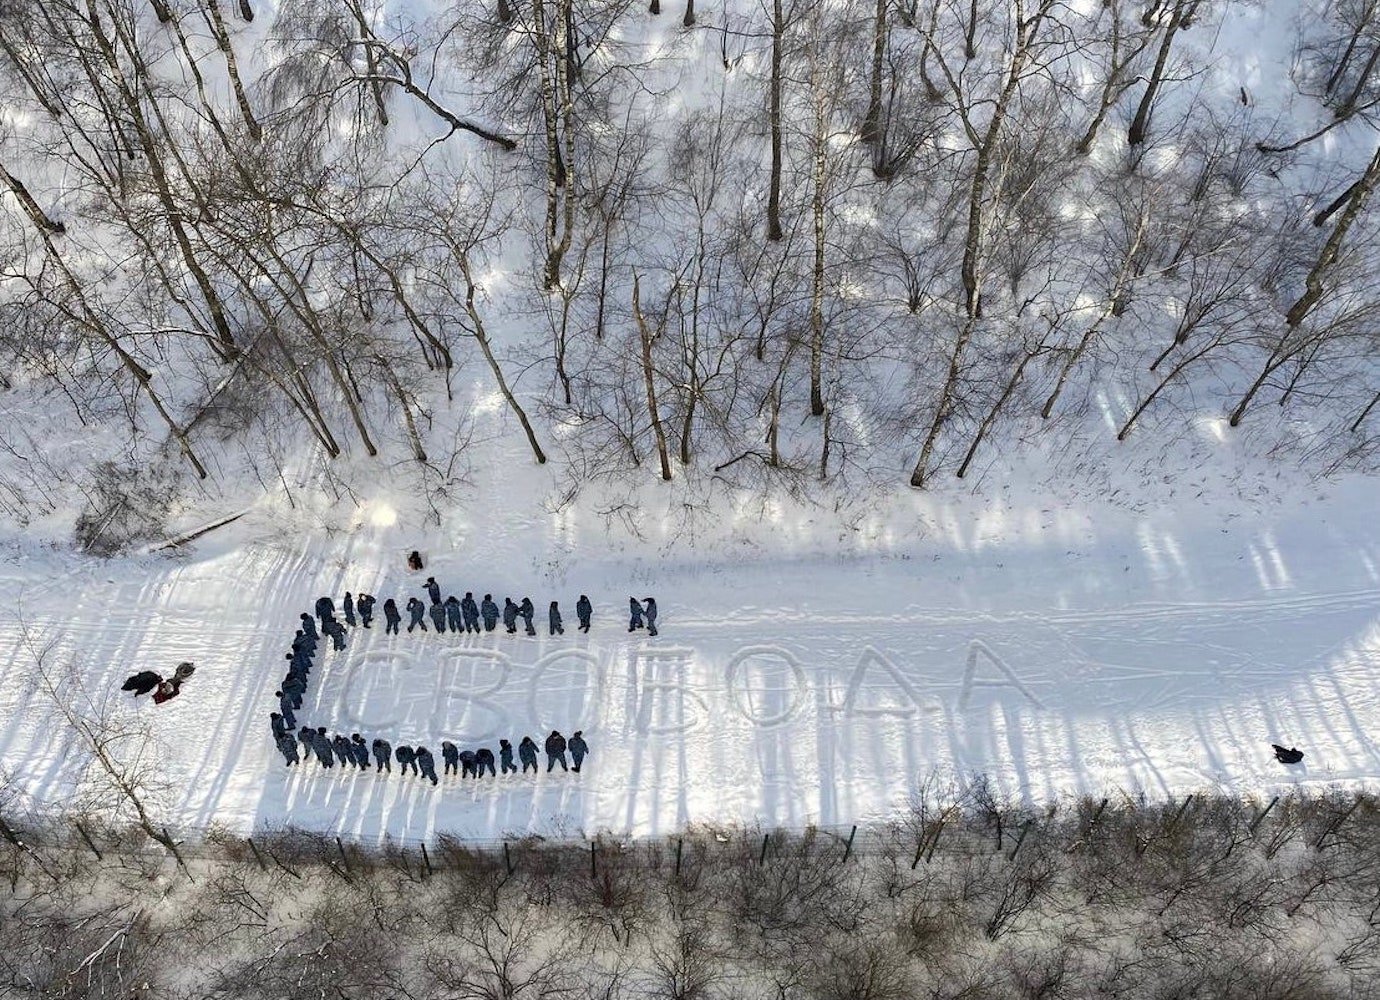 Russian photographer detained and fined after spelling out the word ‘freedom’ in snow 